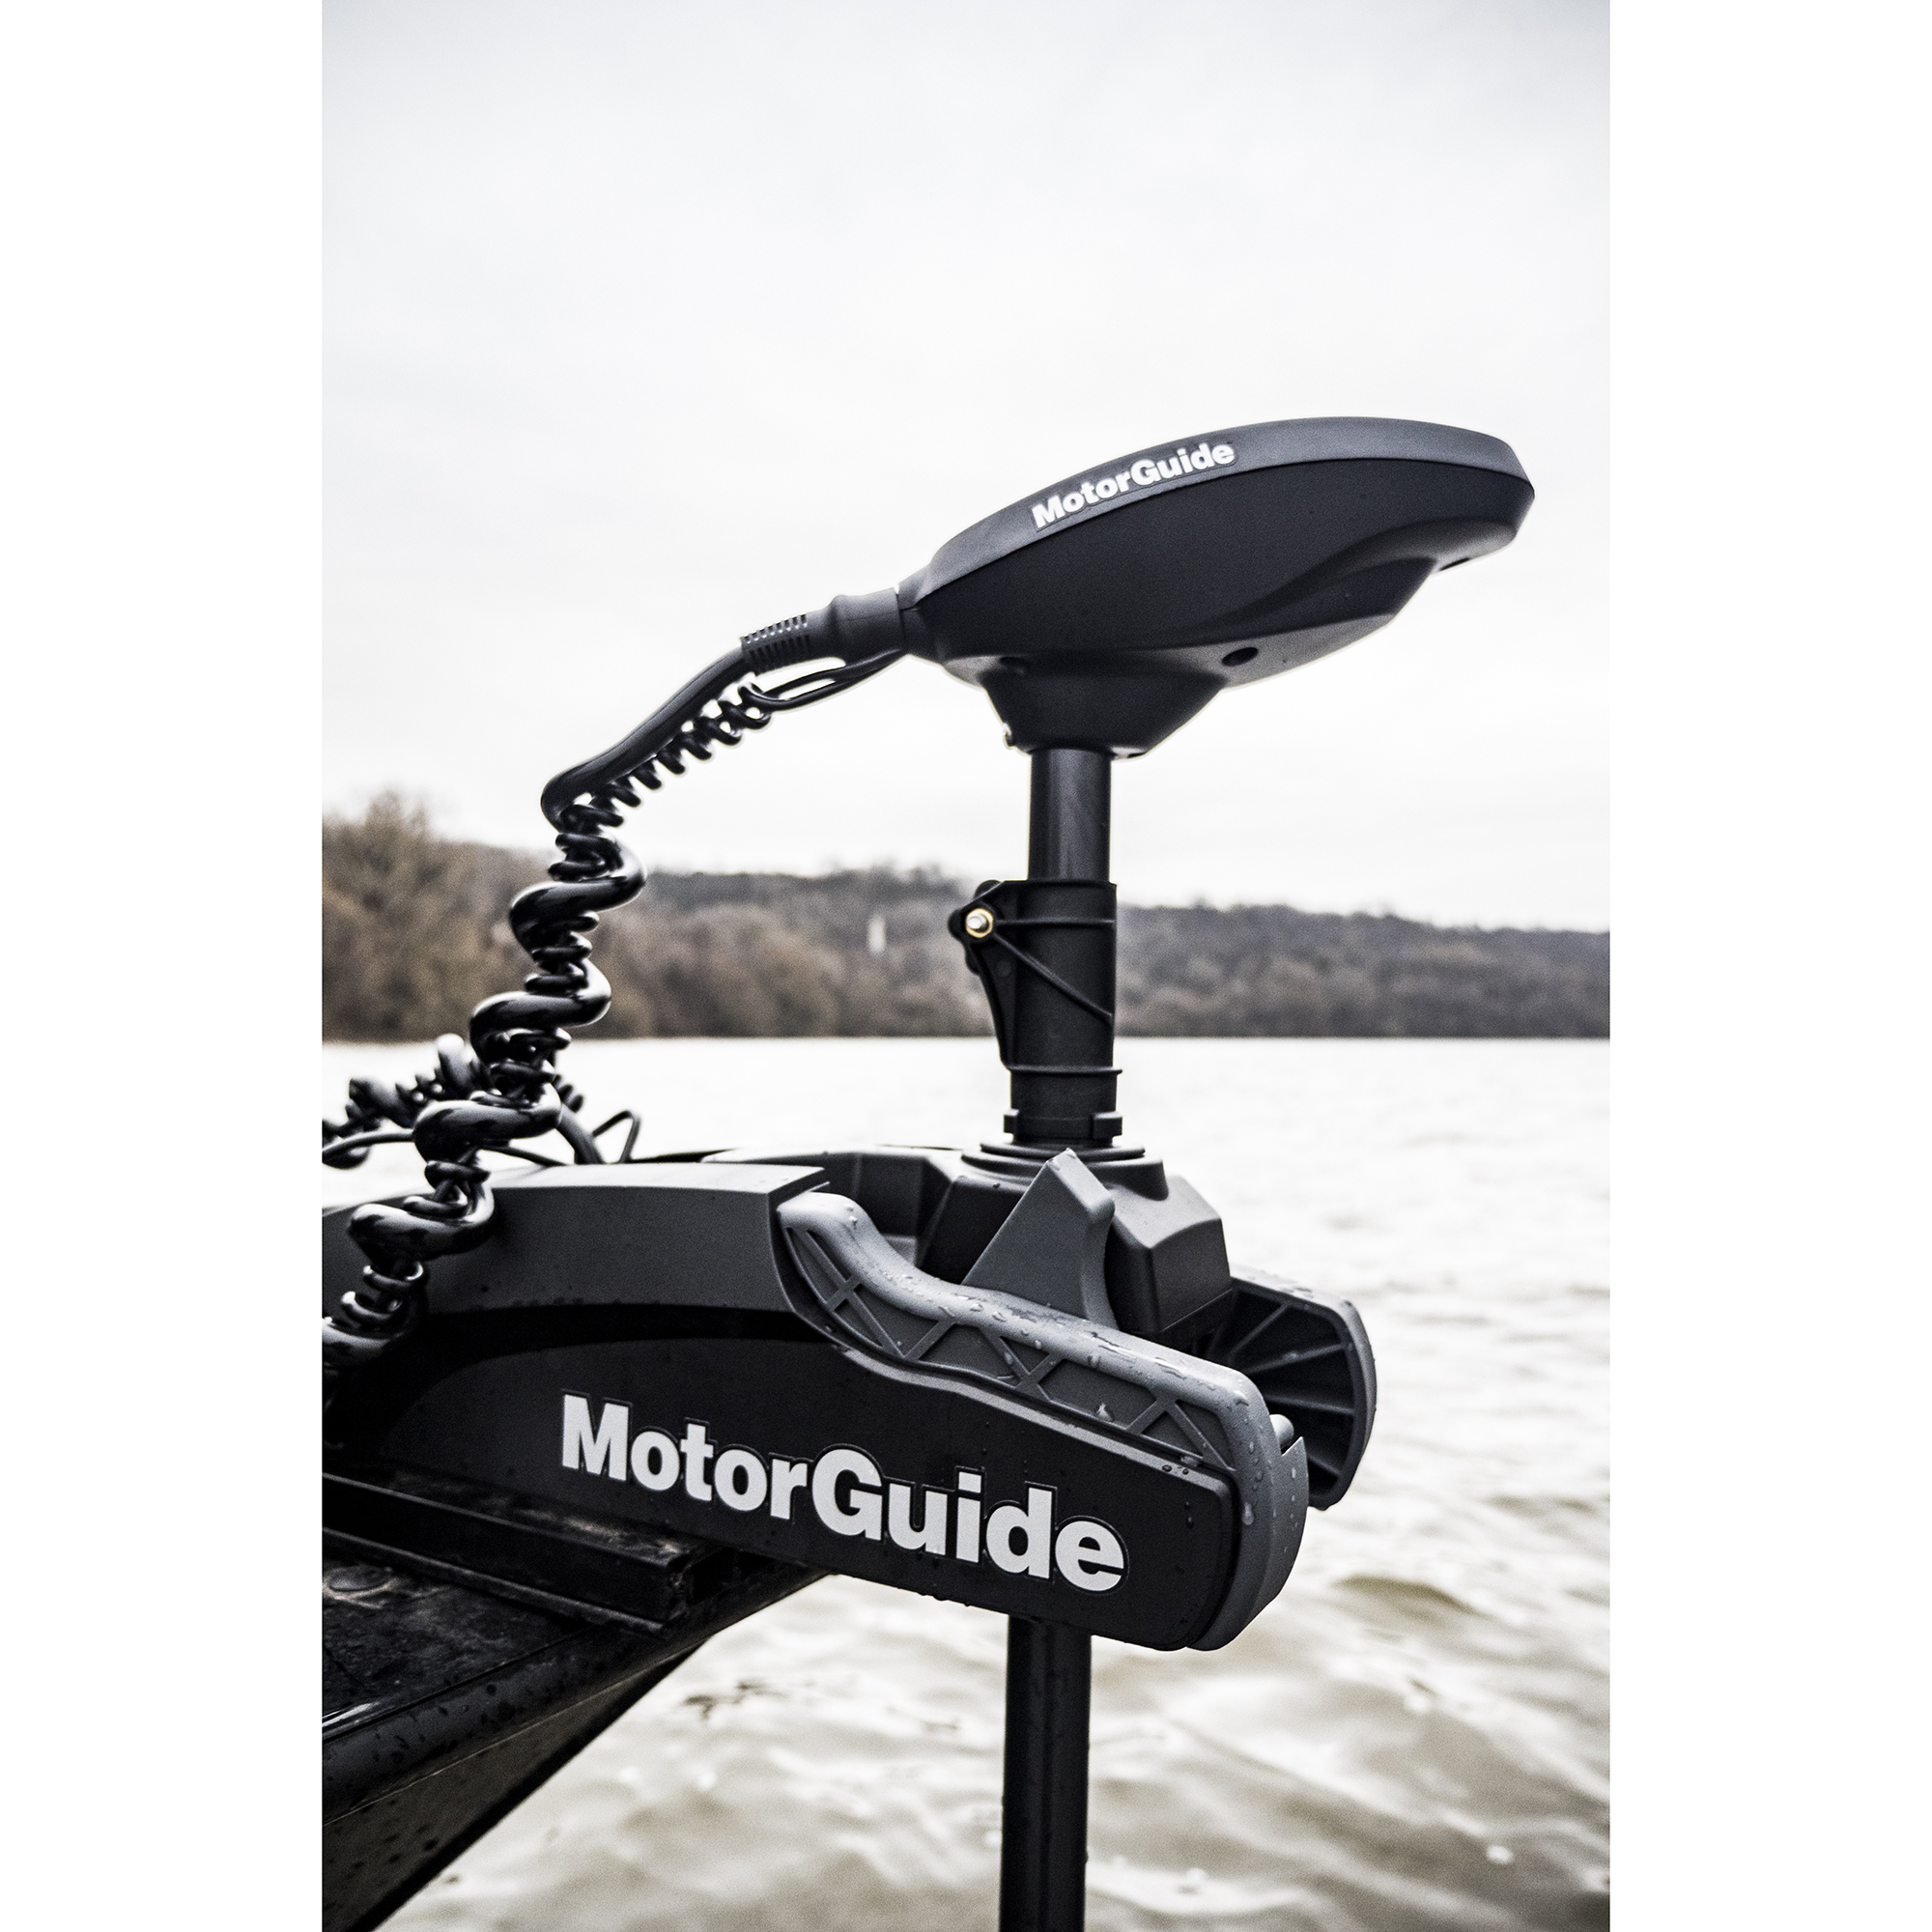 MotorGuide Xi3 Freshwater Wireless Trolling Motor with Transducer, 55-lb.  54